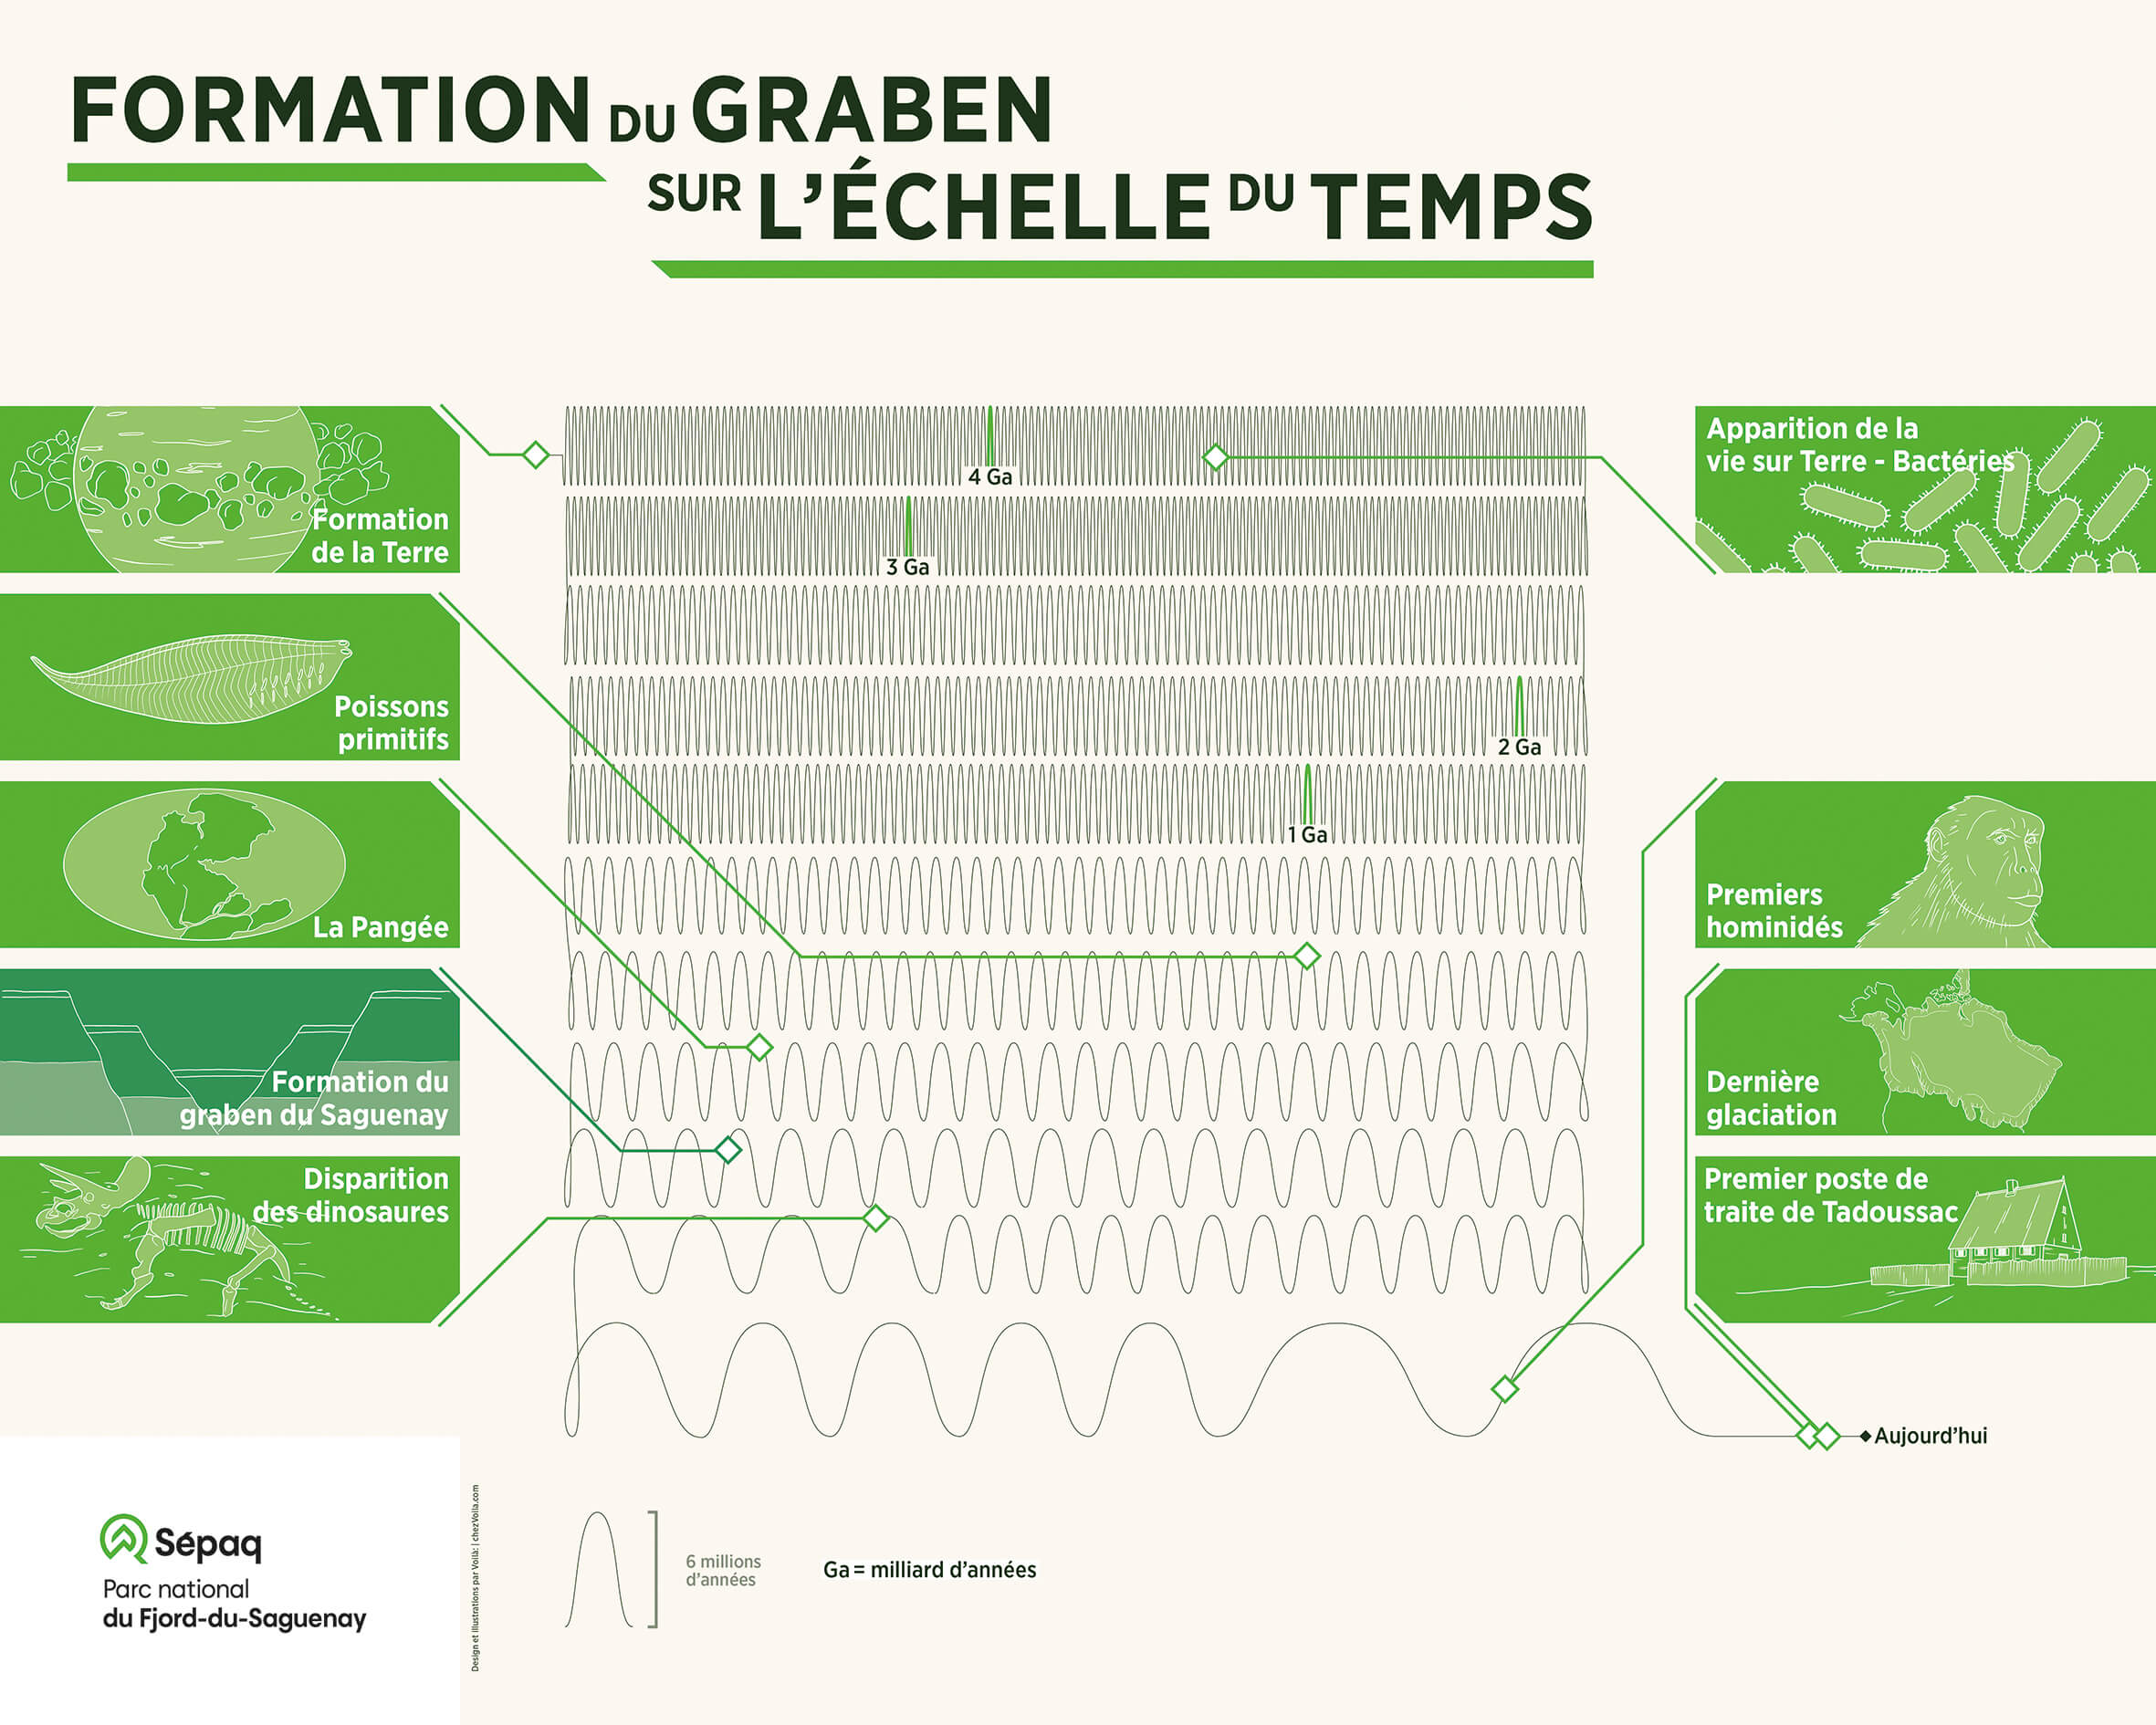 Introductory panel presenting the formation of the Saguenay graben on the time scale. The timeline is a long line condensed in the form of many oscillations. These are linked together in a total of 11 rows in the middle of the panel. Very tight on the first rows, the oscillations are more and more dilated as time passes. The last row of the timeline is therefore the most airy. Each billion years is marked by a small label on its oscillation highlighted in green. The timeline is also punctuated by major historical milestones, located by pointers. In chronological order, it begins with the formation of the Earth, 4.5 billion years ago. Then, life appeared with the first bacteria, then primitive fish. Geologically, Pangea was formed several million years later, followed by the formation of the Saguenay graben. The last four dates are the disappearance of the dinosaurs, the appearance of the first hominids, the period of the last ice age and, the most recent, the construction of the first trading post in Tadoussac. Each of these dates is illustrated by a white drawing on a green rectangle. These illustrations are divided into two columns on either side of the timeline.